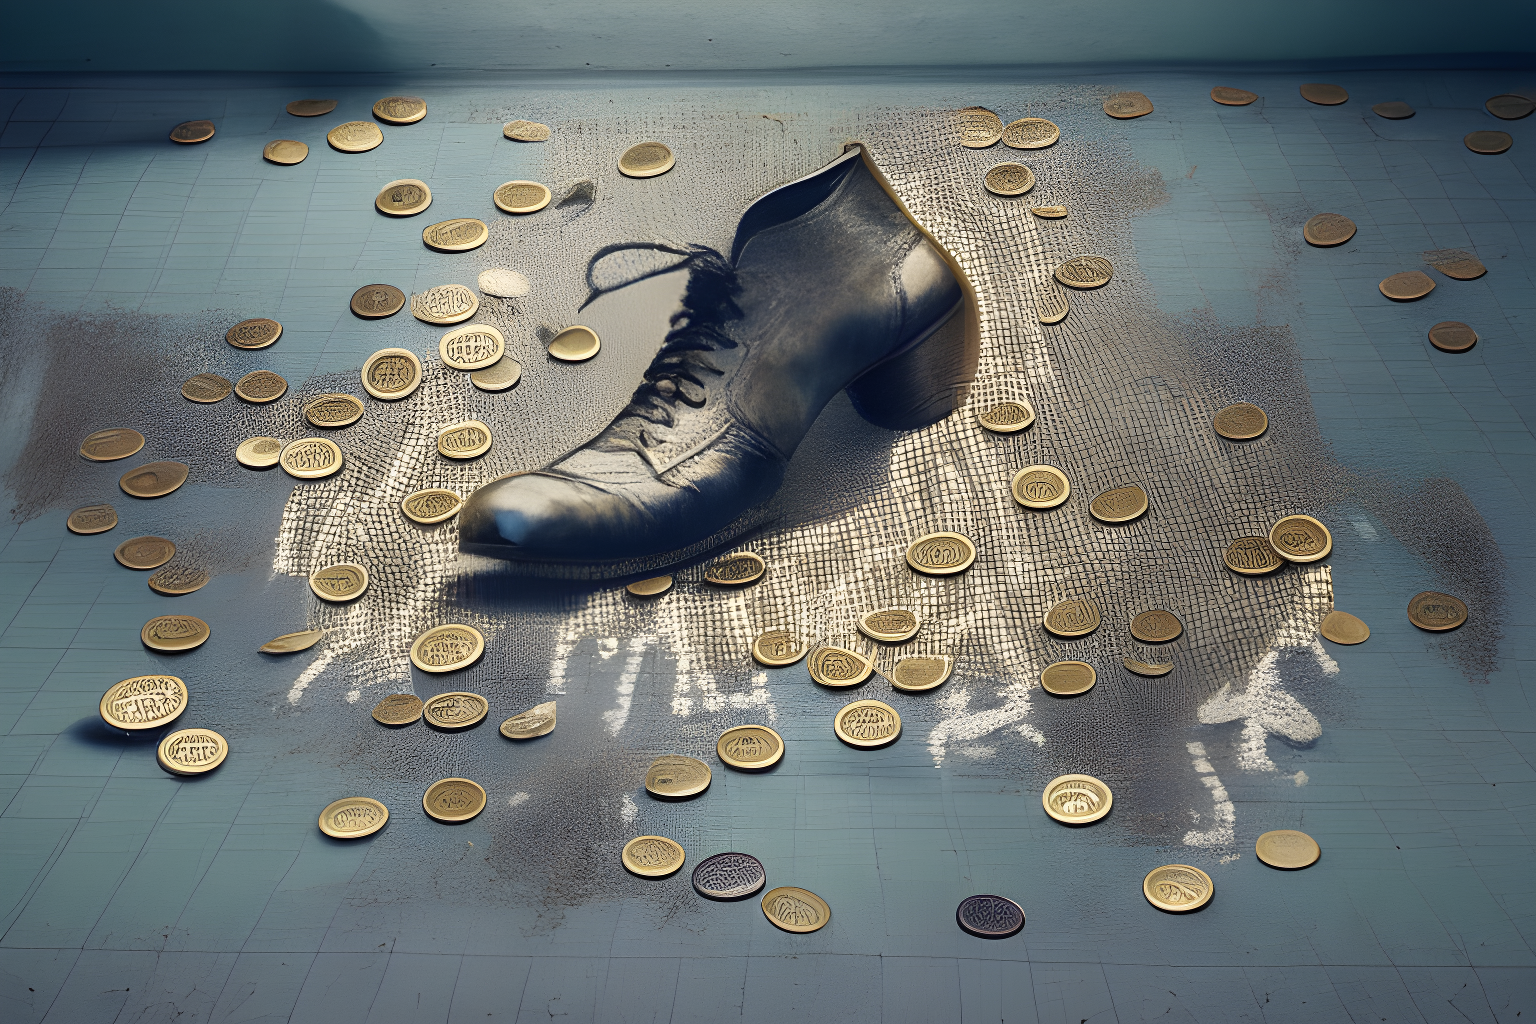 A dance chart with coins scattered around between the shoe prints